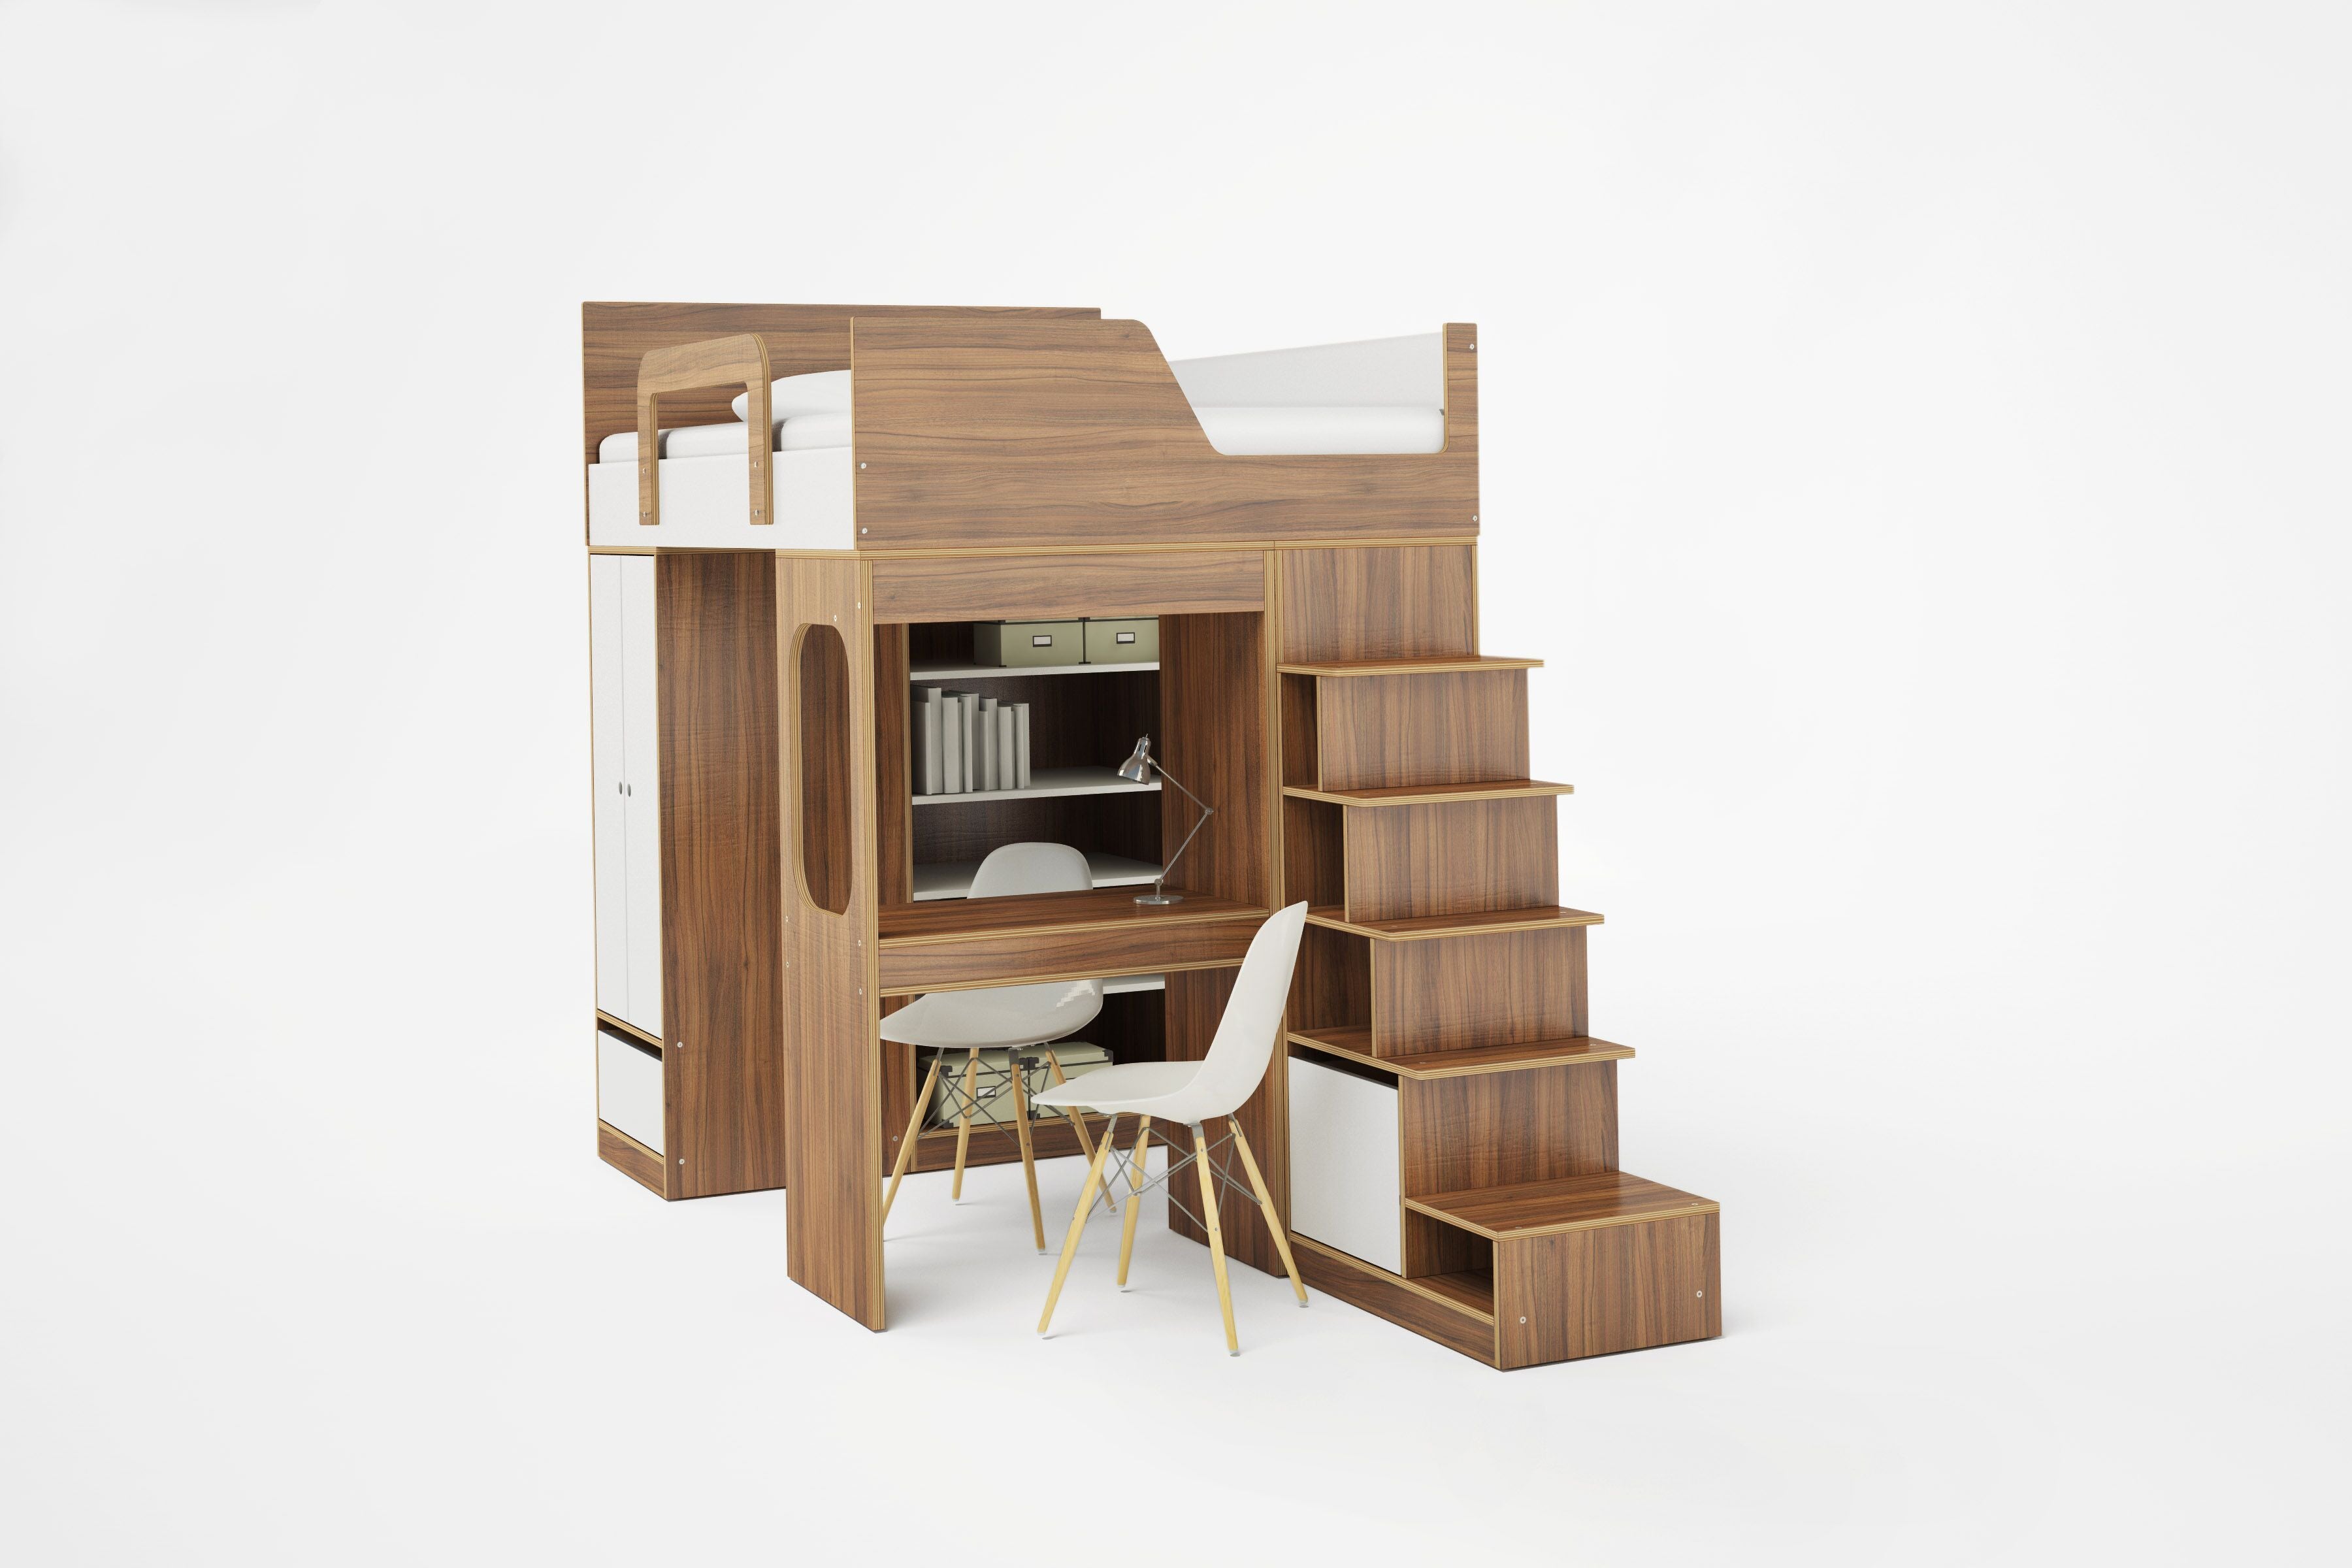 Compact wooden loft bed with desk, shelves, stairs, on white background.